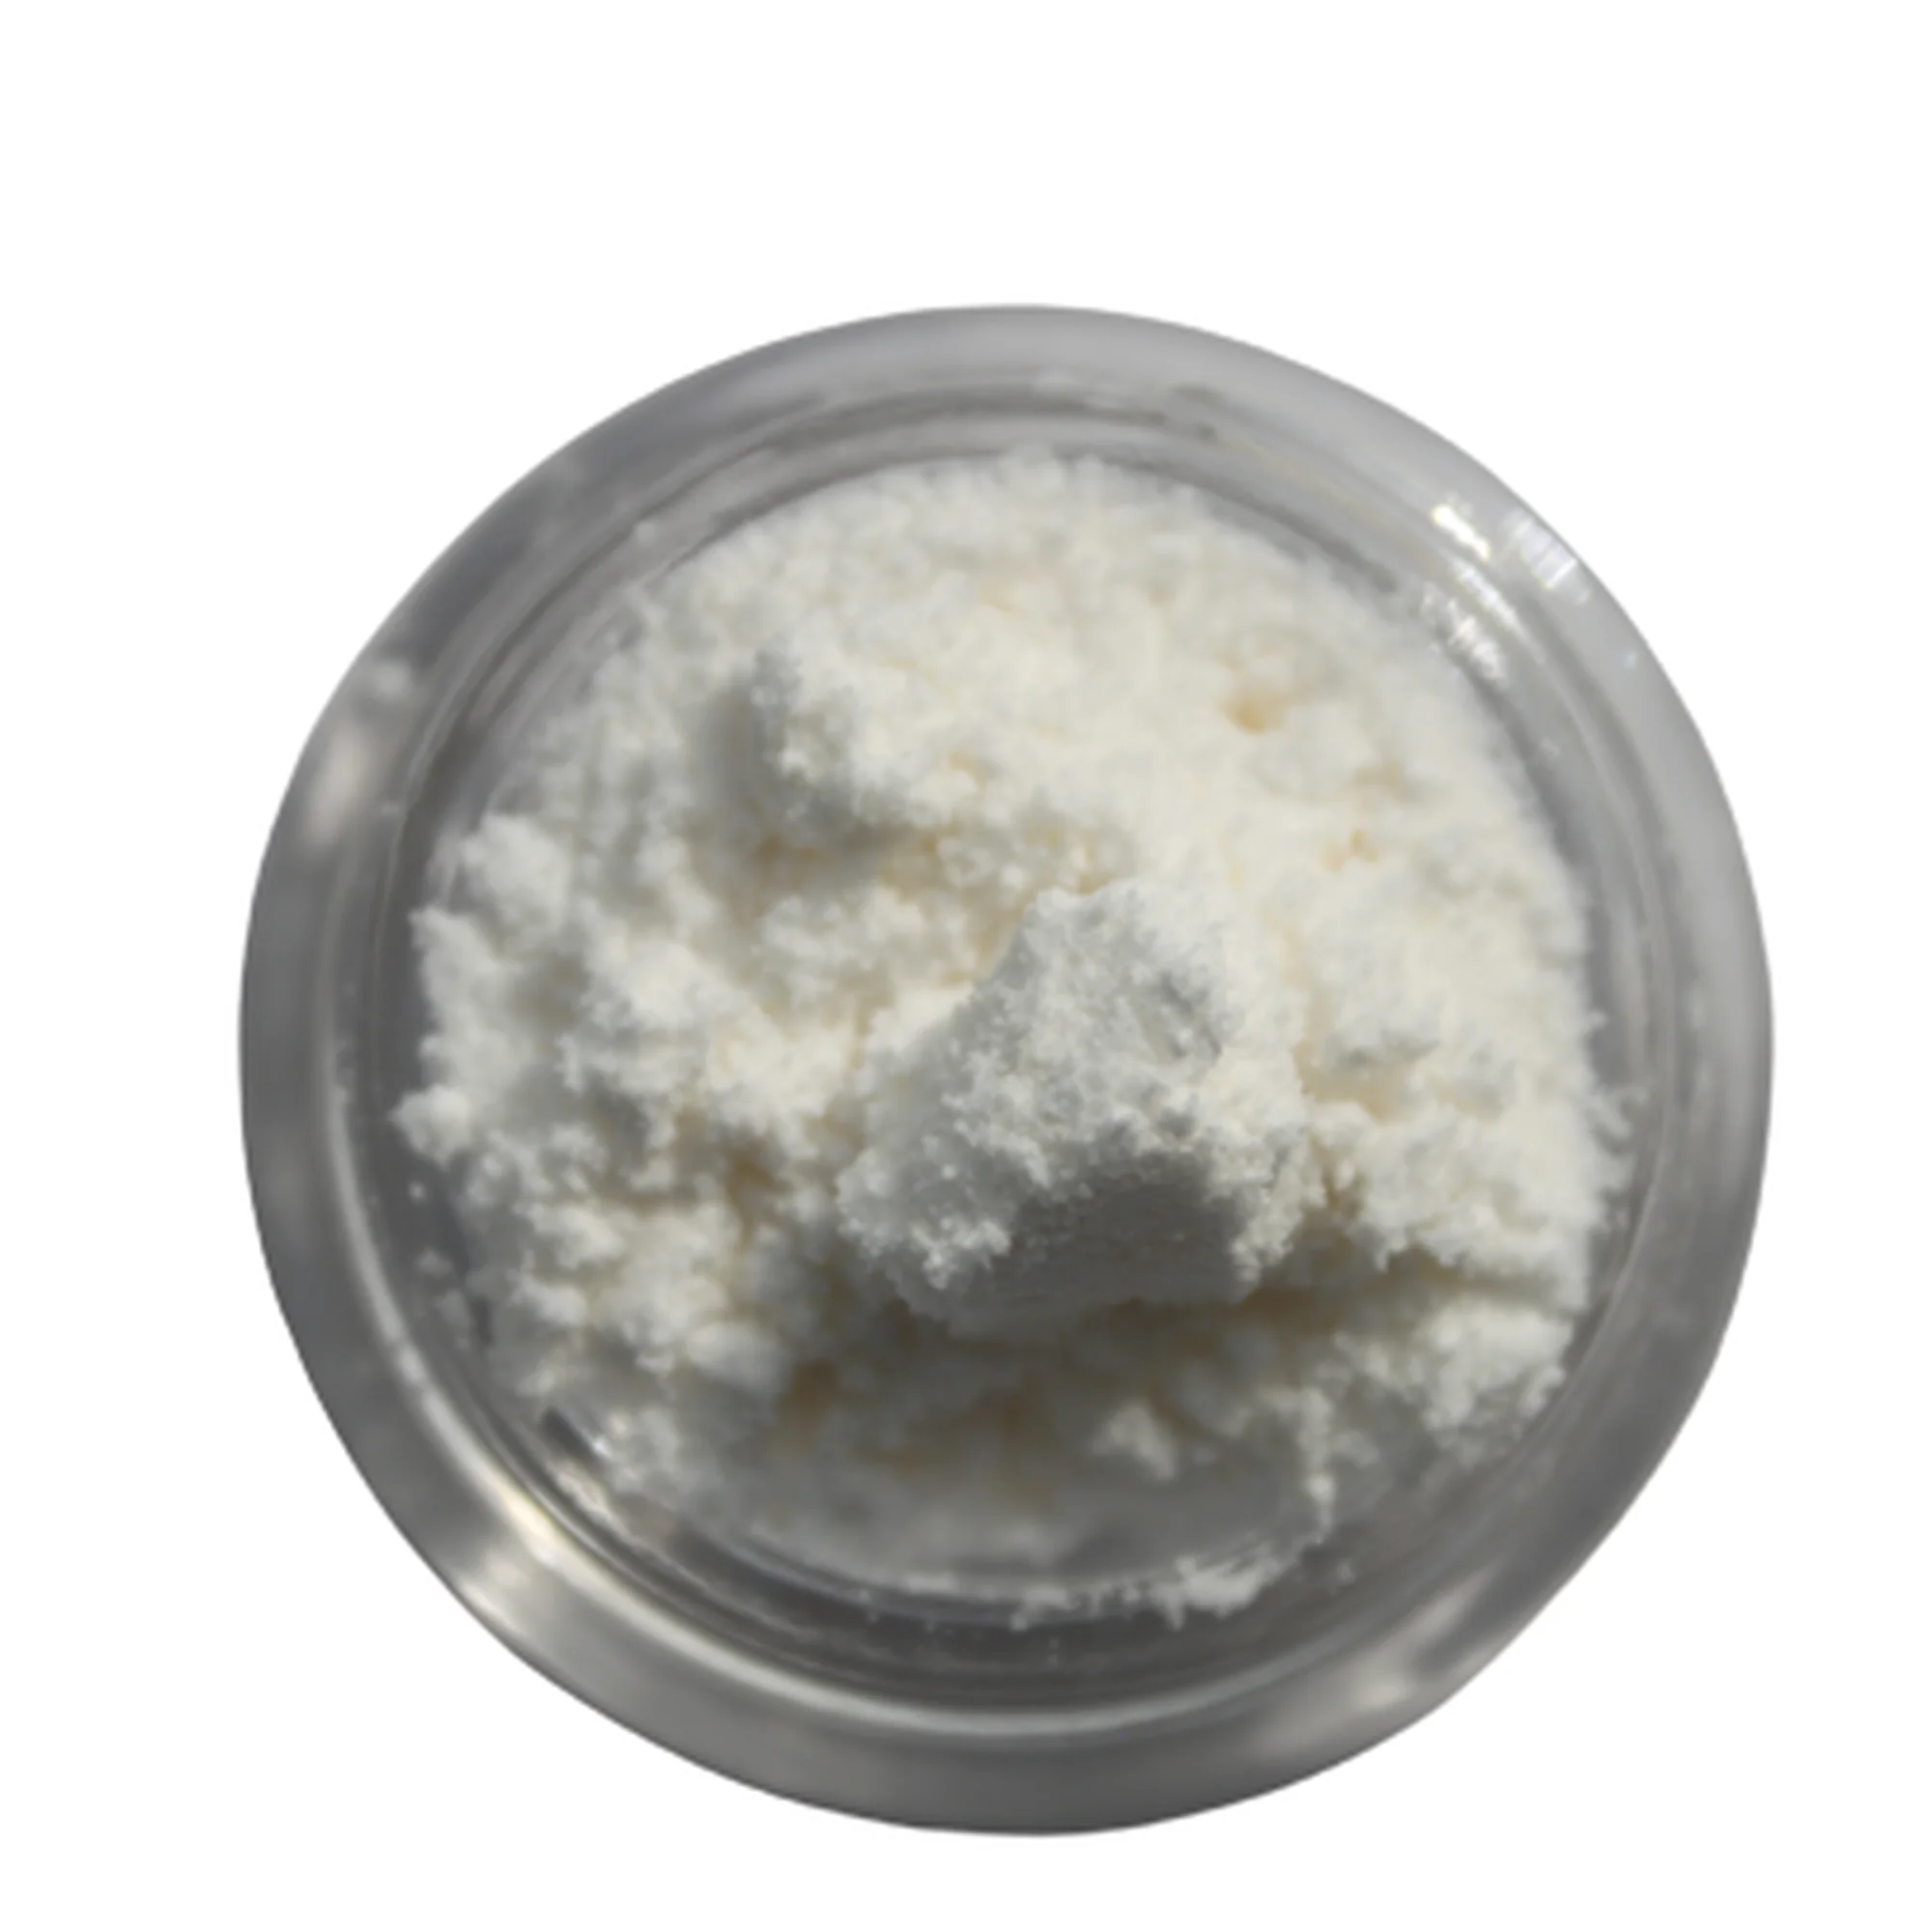 
Fast Shipping Top Quality CBD Isolate Made in Colorado USA 99 percent Pure 1 gram sample  (1700003344142)